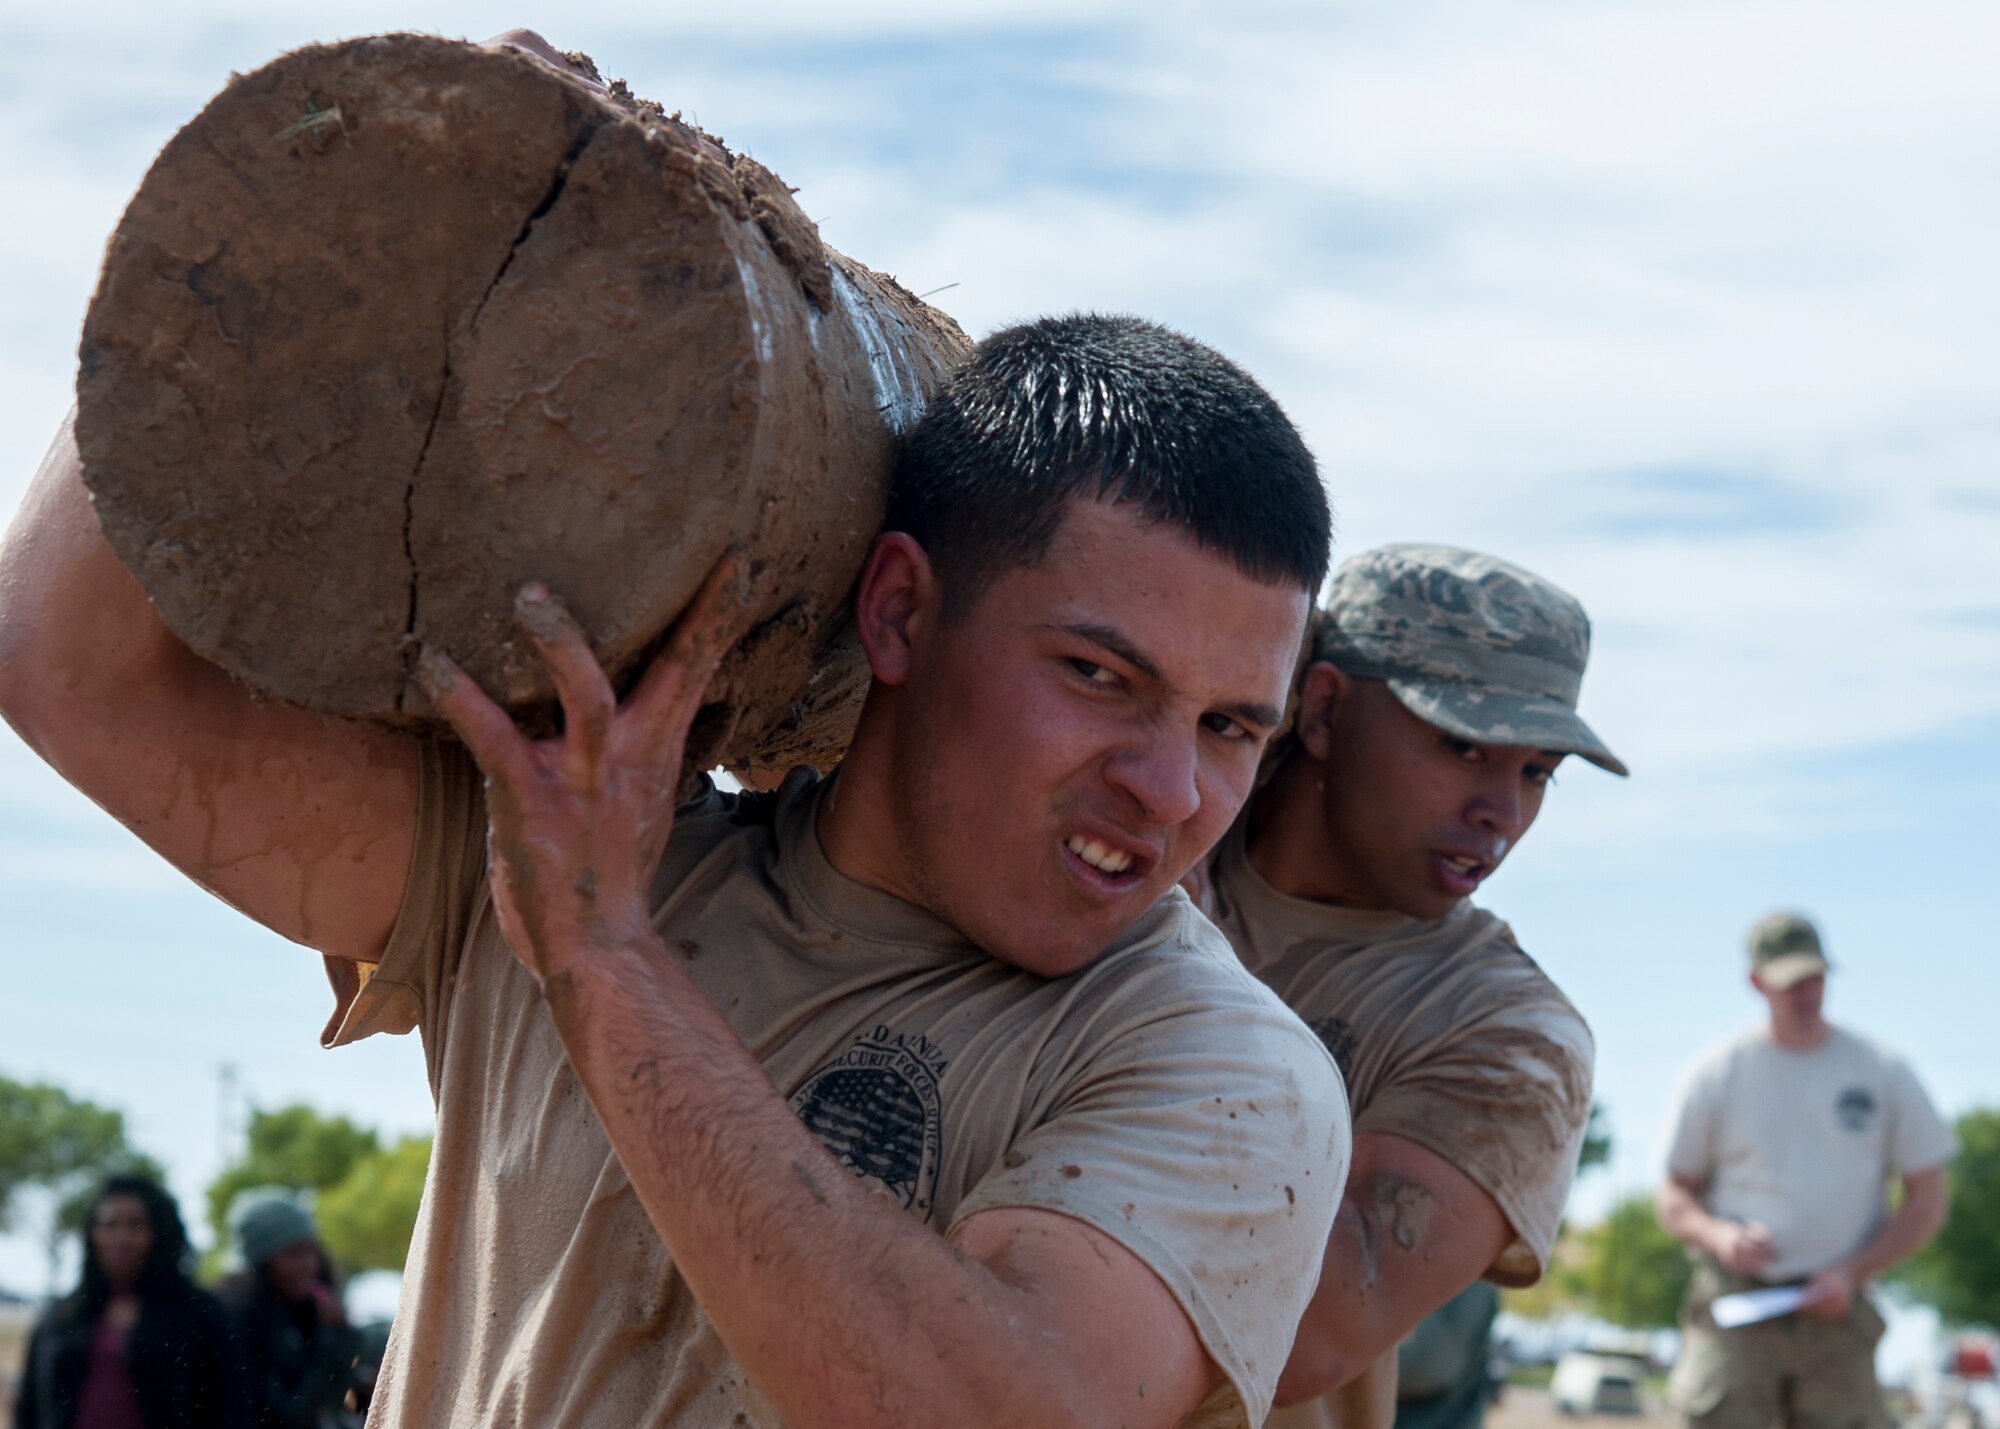 Airman 1st Class Dalton Cruz, 377th Weapons Systems Security Squadron, carries a log with his teammate during the “Team Punisher” portion of the Manzano Challenge at Kirtland Air Force Base, N.M., Oct. 27. The Manzano Challenge required more than 70 volunteers and coordination with 21 base agencies, making the course safe for all participants. (U.S. Air Force photo by Staff Sgt. J.D. Strong II)